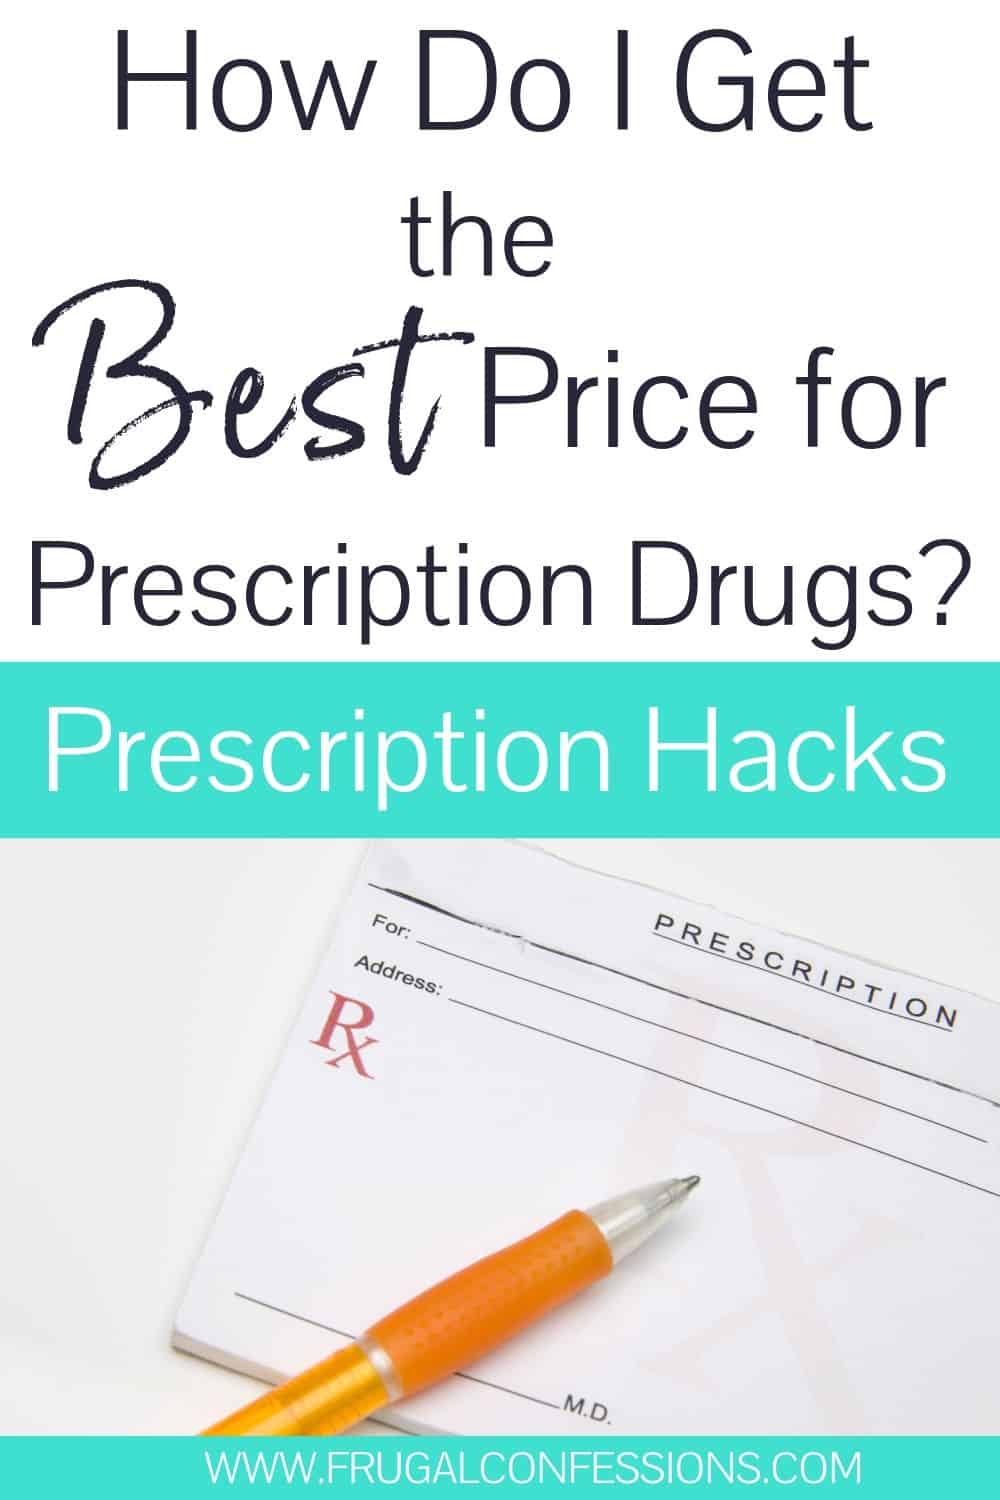 prescription pad with pen on white background, text overlay "how do I get the best price for prescription drugs?"